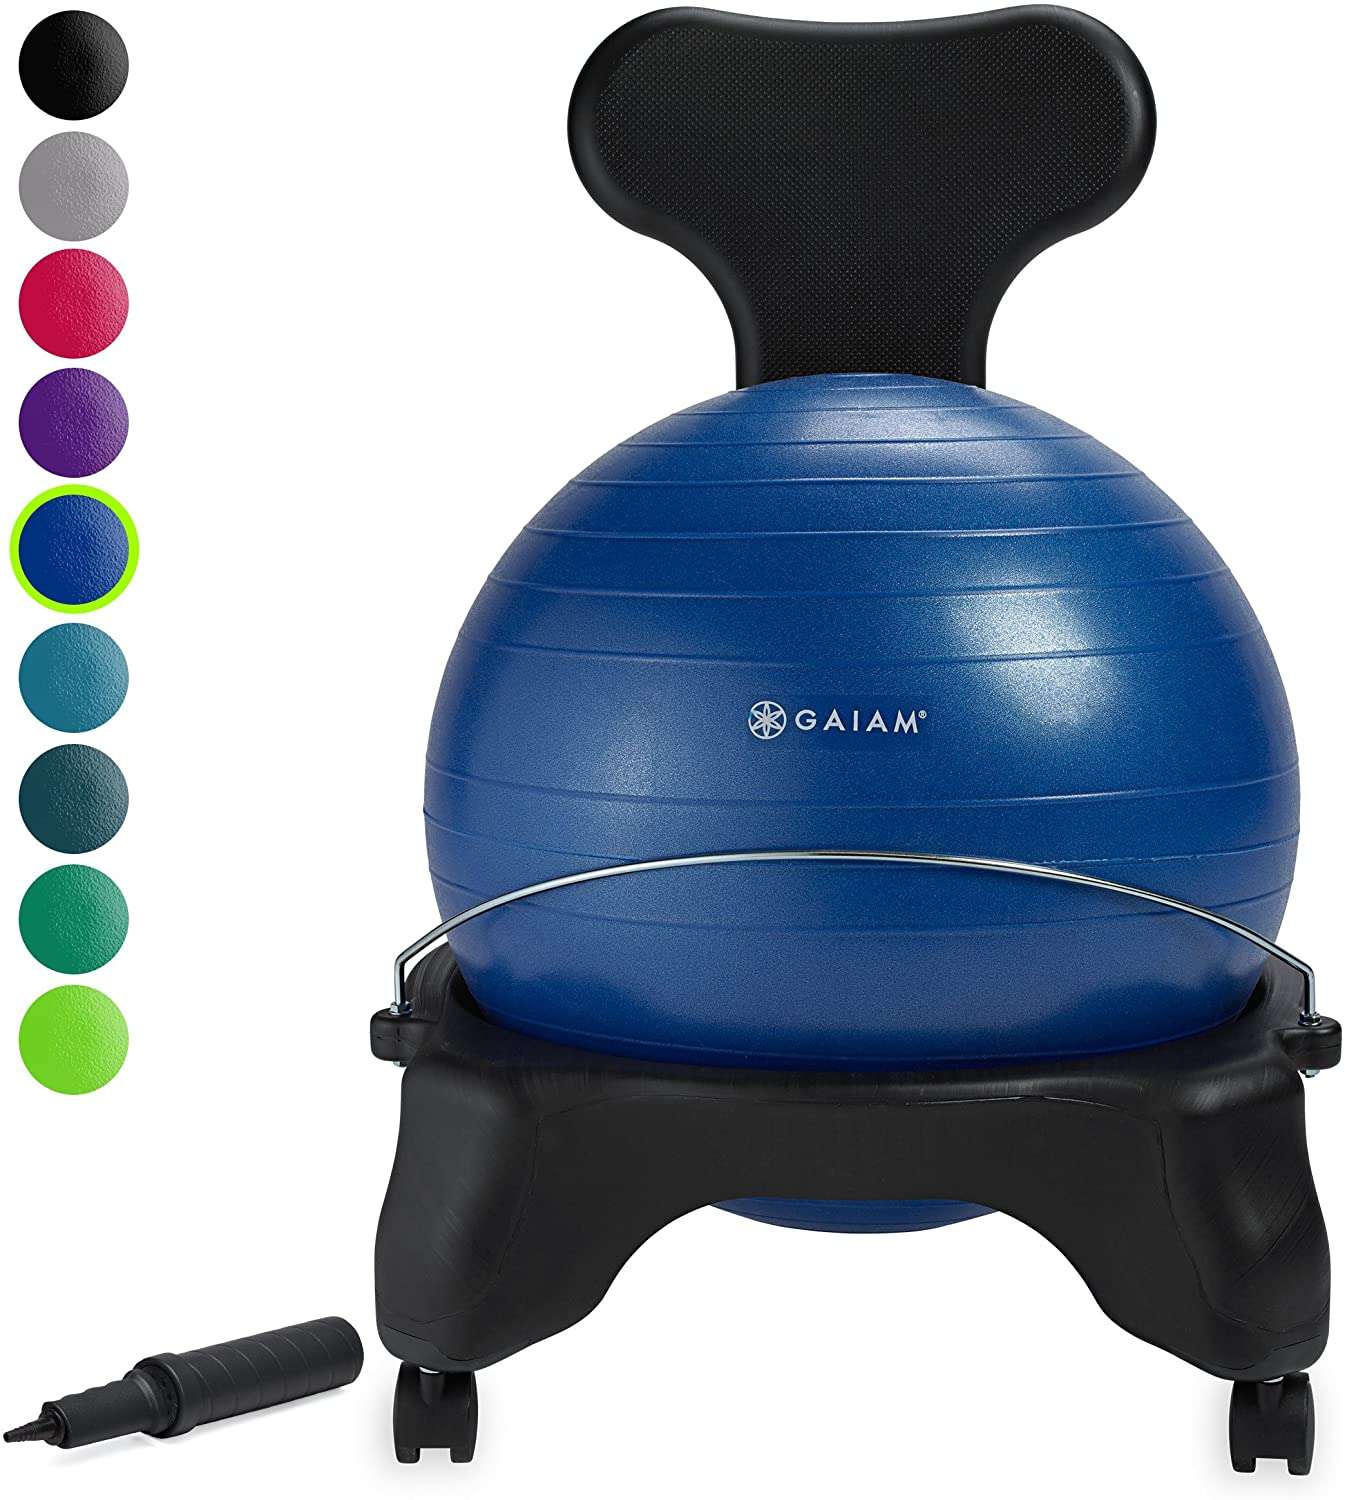 gaiam classic balance yoga ball chair set isolated on white background